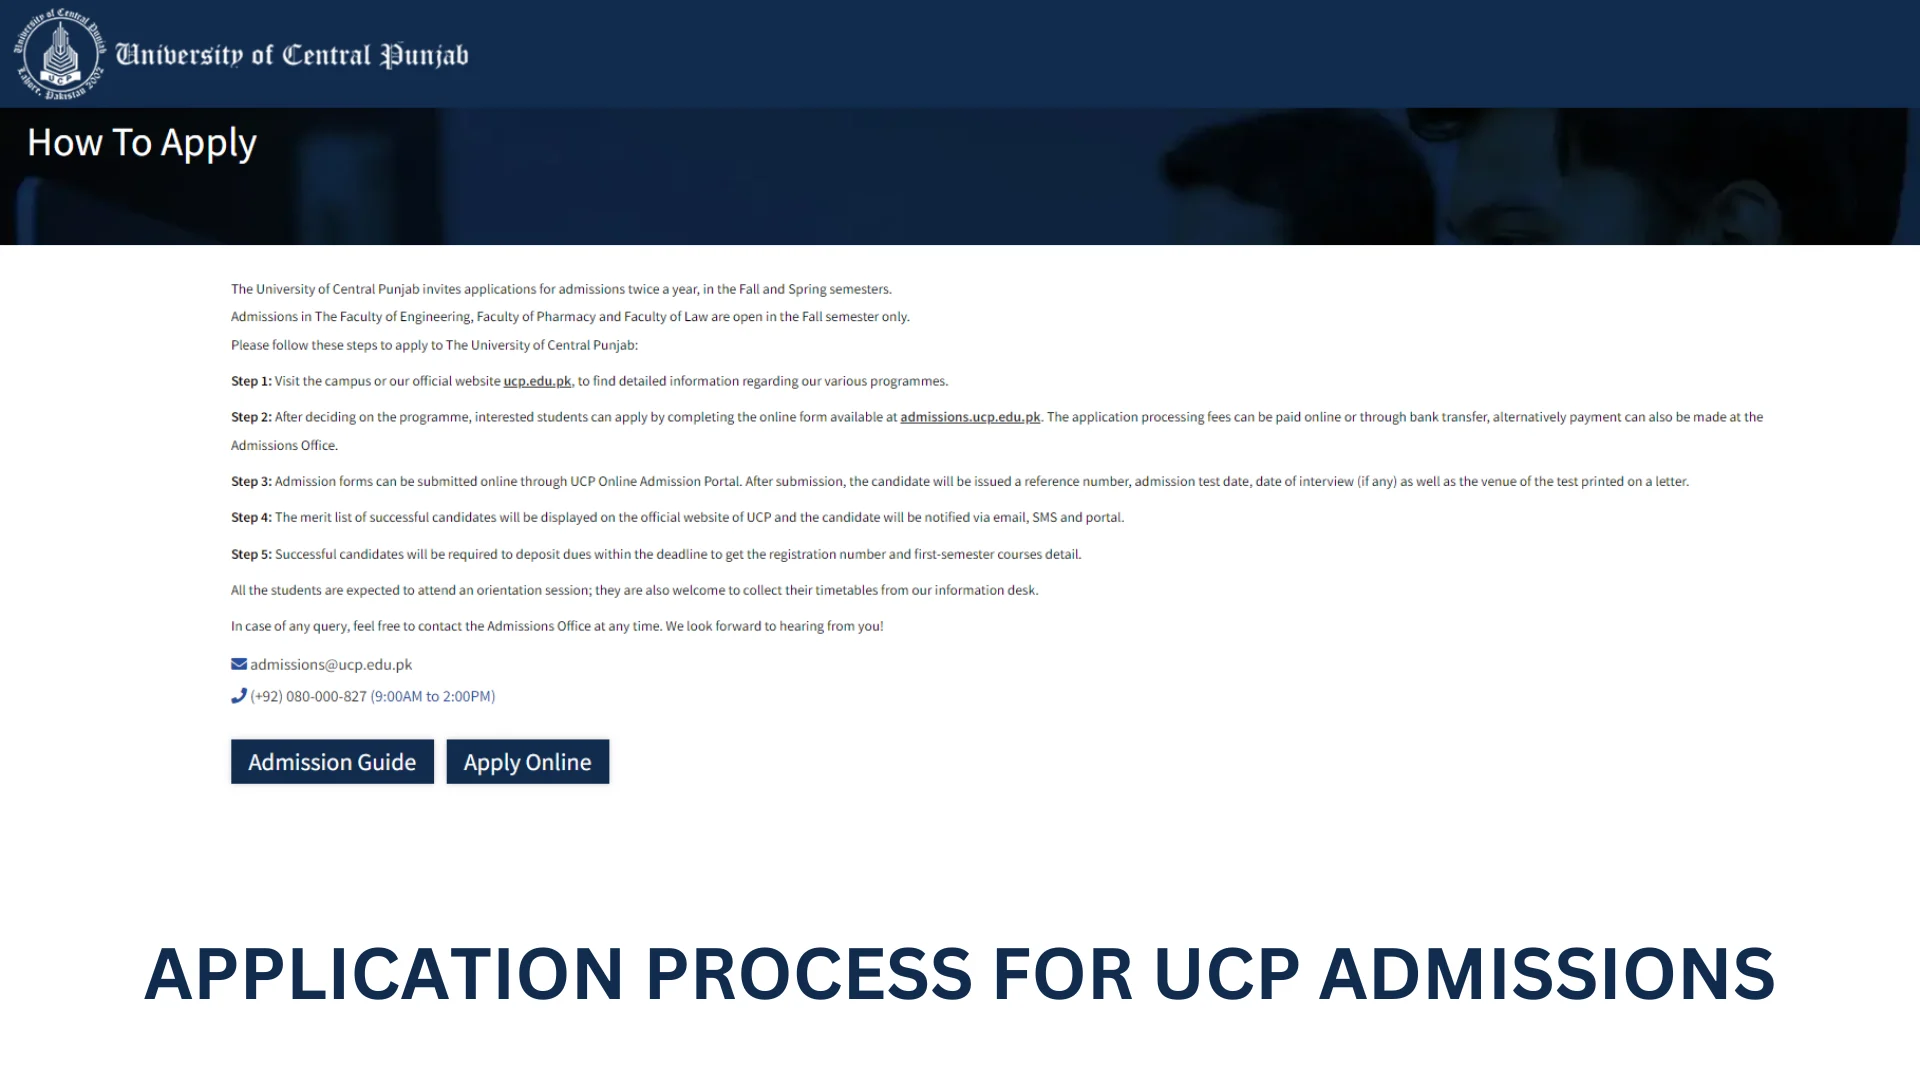 Application Process for UCP Admissions